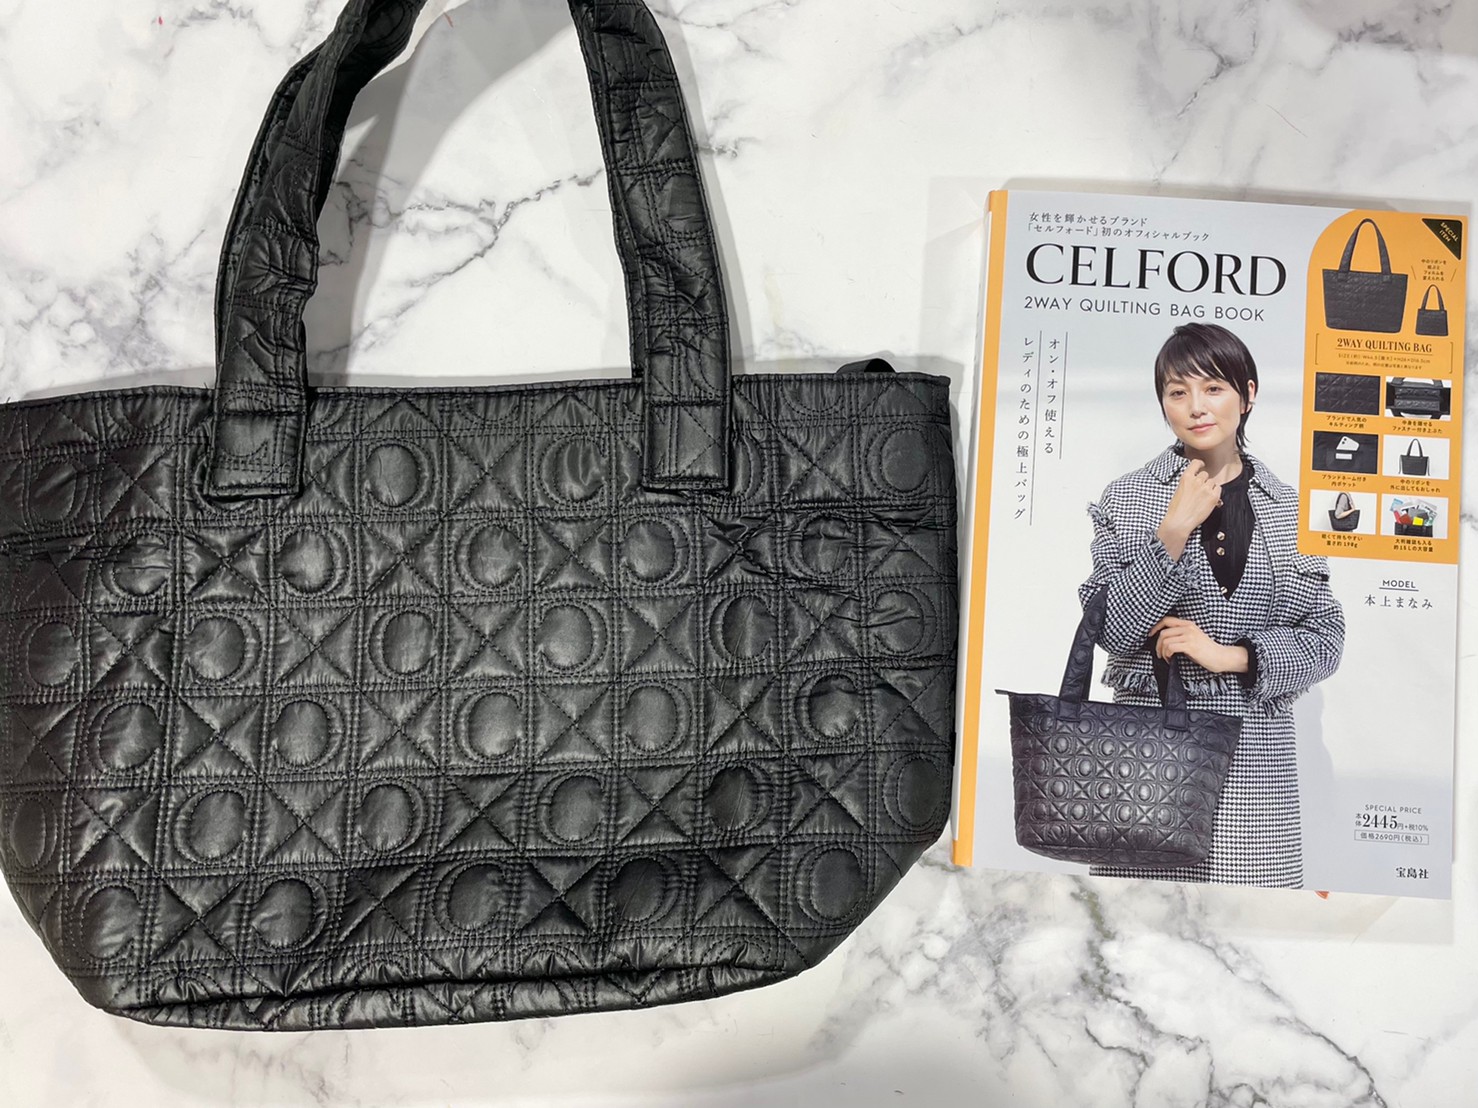 CELFORD 2WAY QUILTING BAG BOOKと付録画像